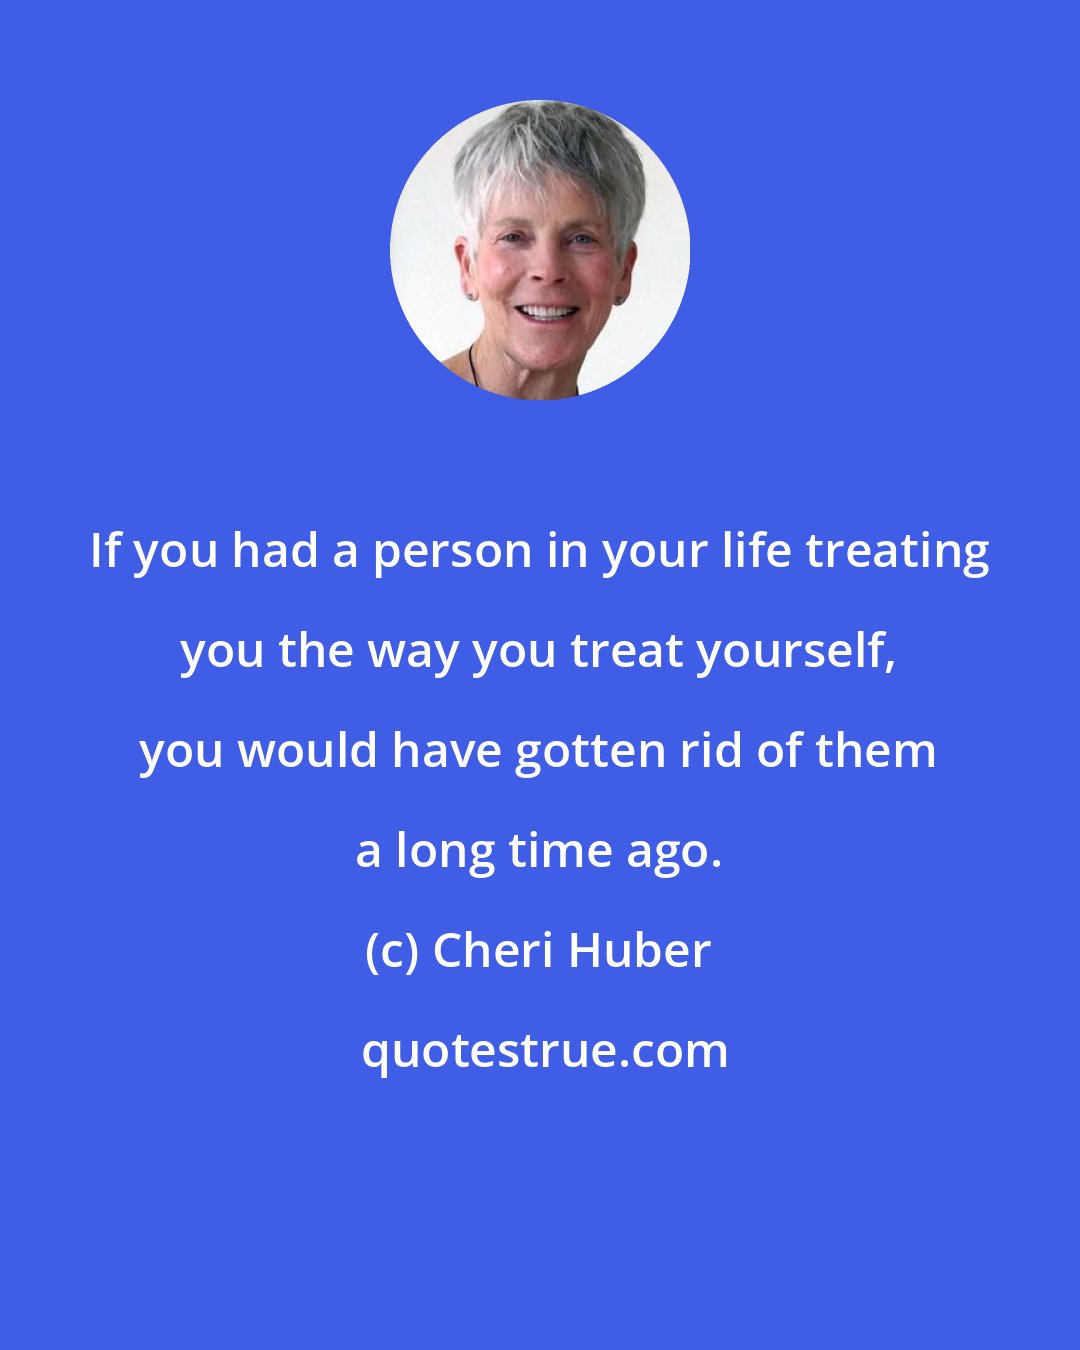 Cheri Huber: If you had a person in your life treating you the way you treat yourself, you would have gotten rid of them a long time ago.